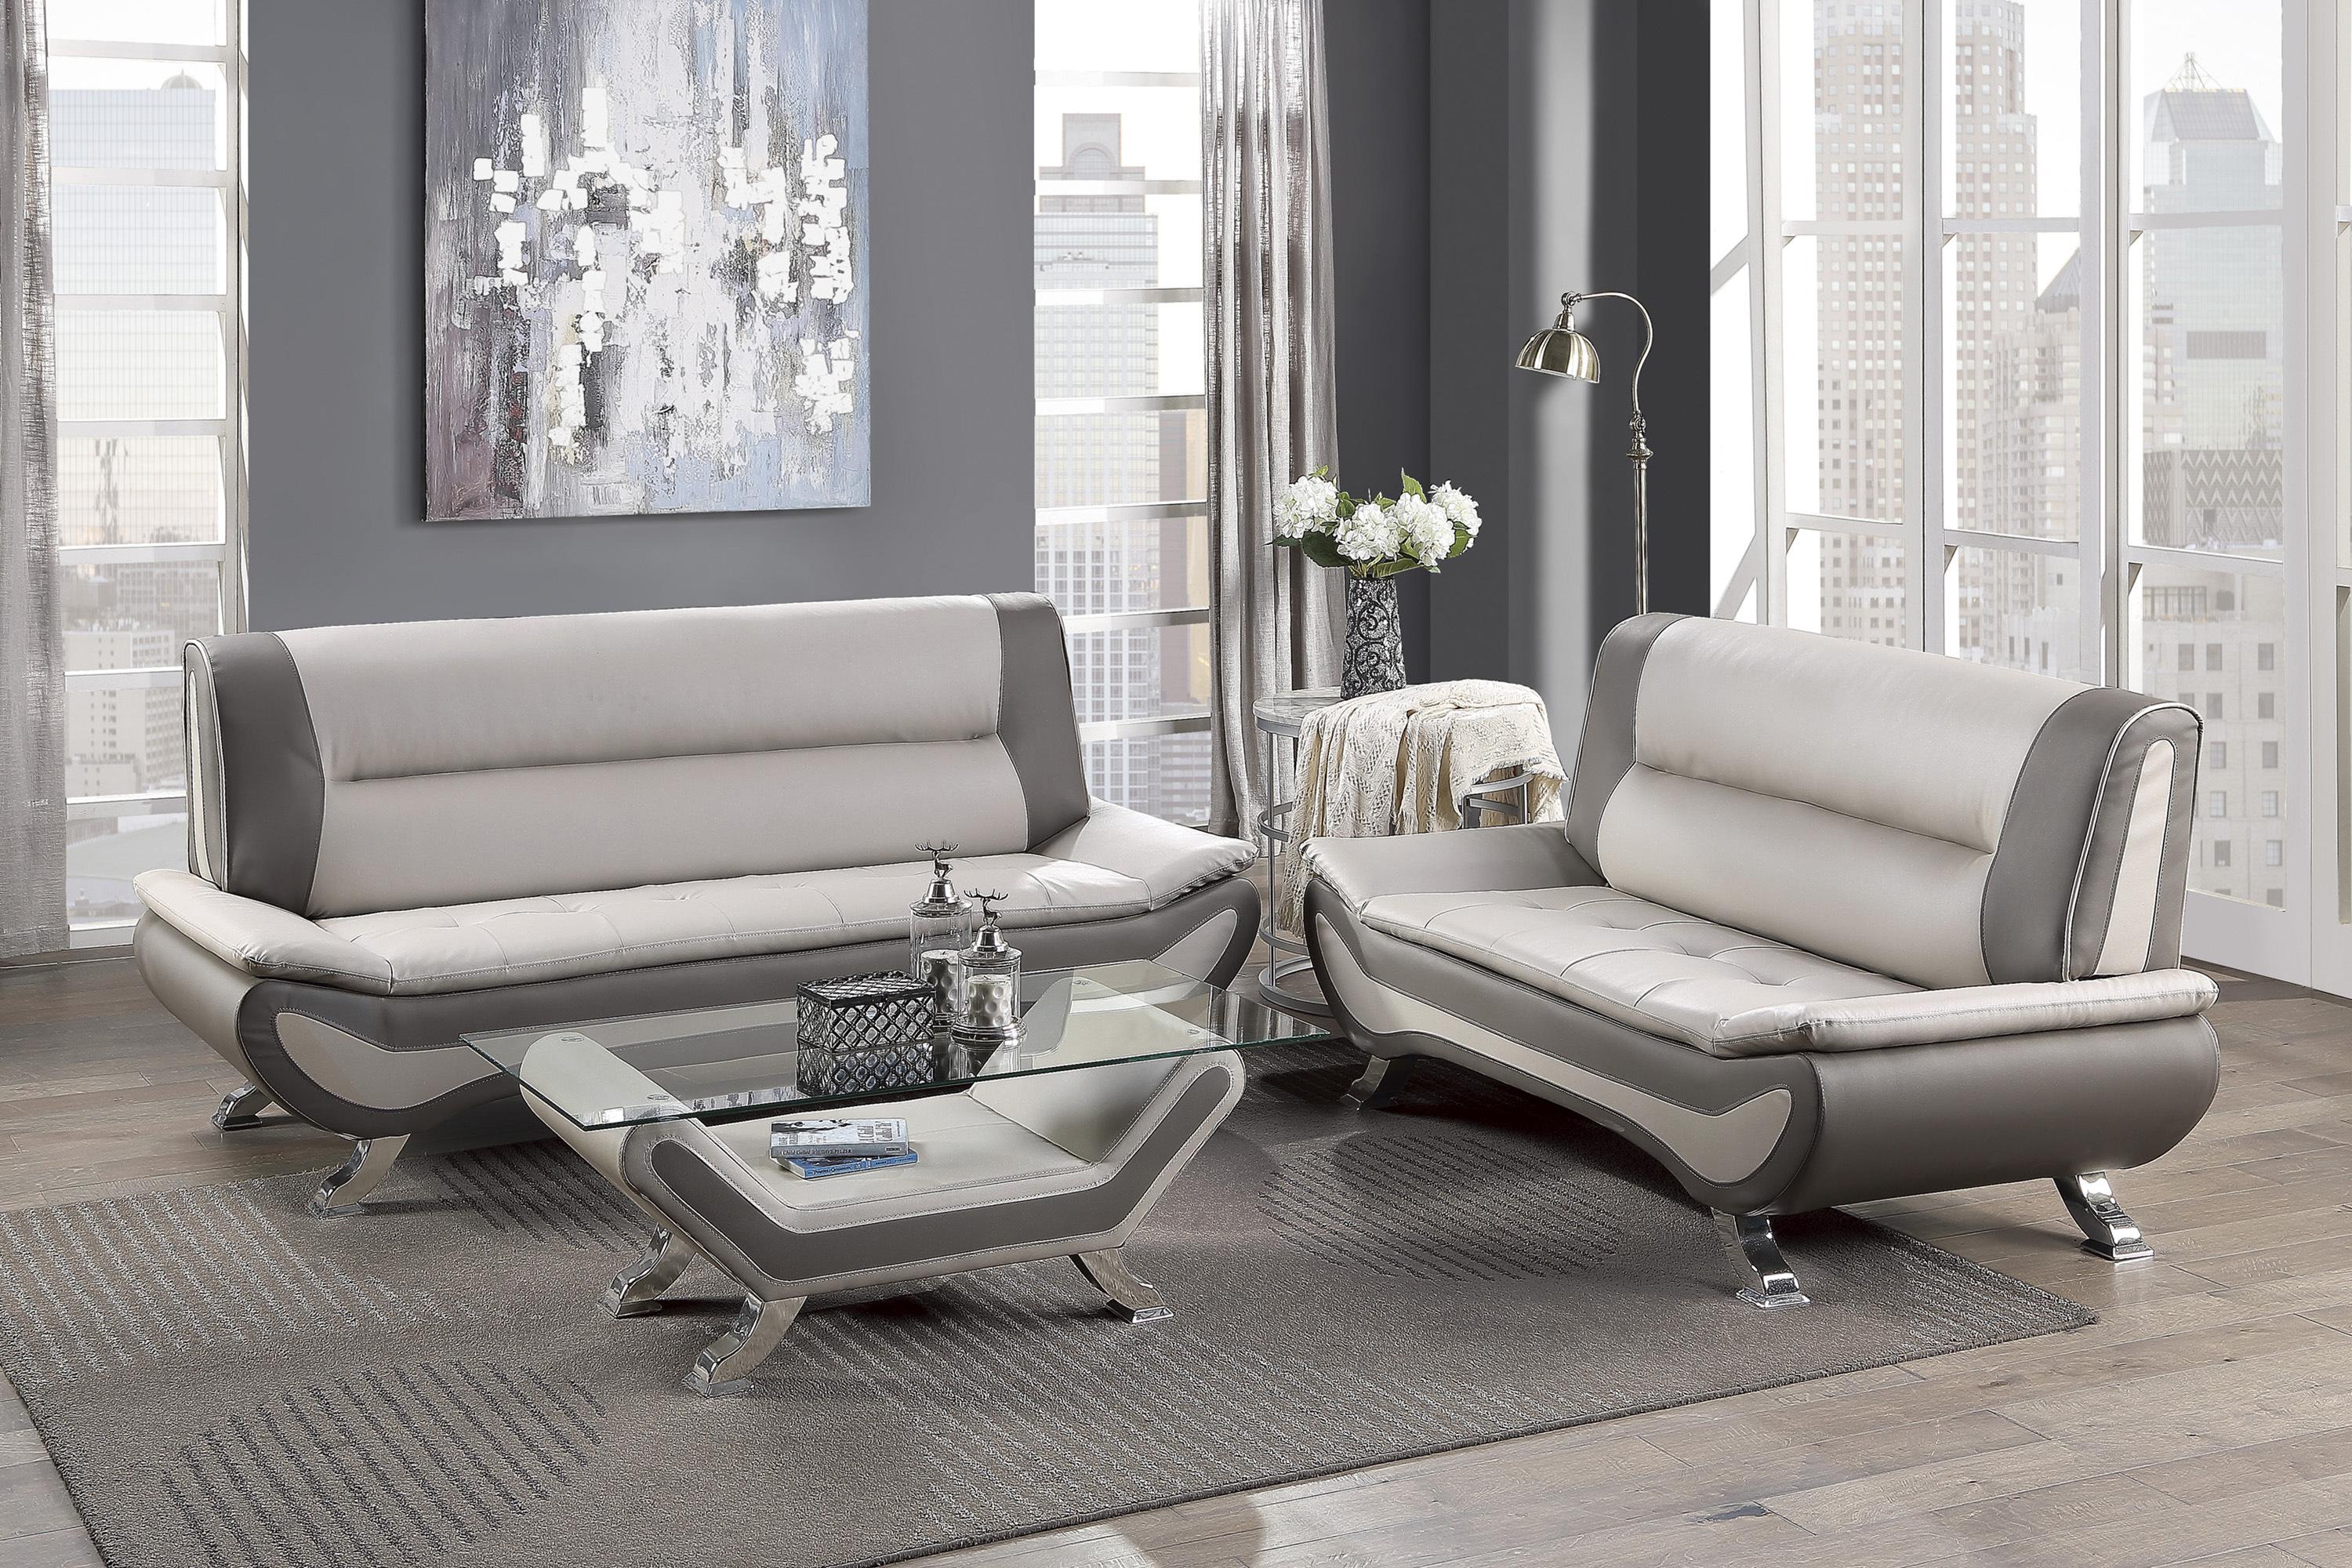 Contemporary Living Room Set 8219BEG-2PC Veloce 8219BEG-2PC in Gray, Beige Faux Leather